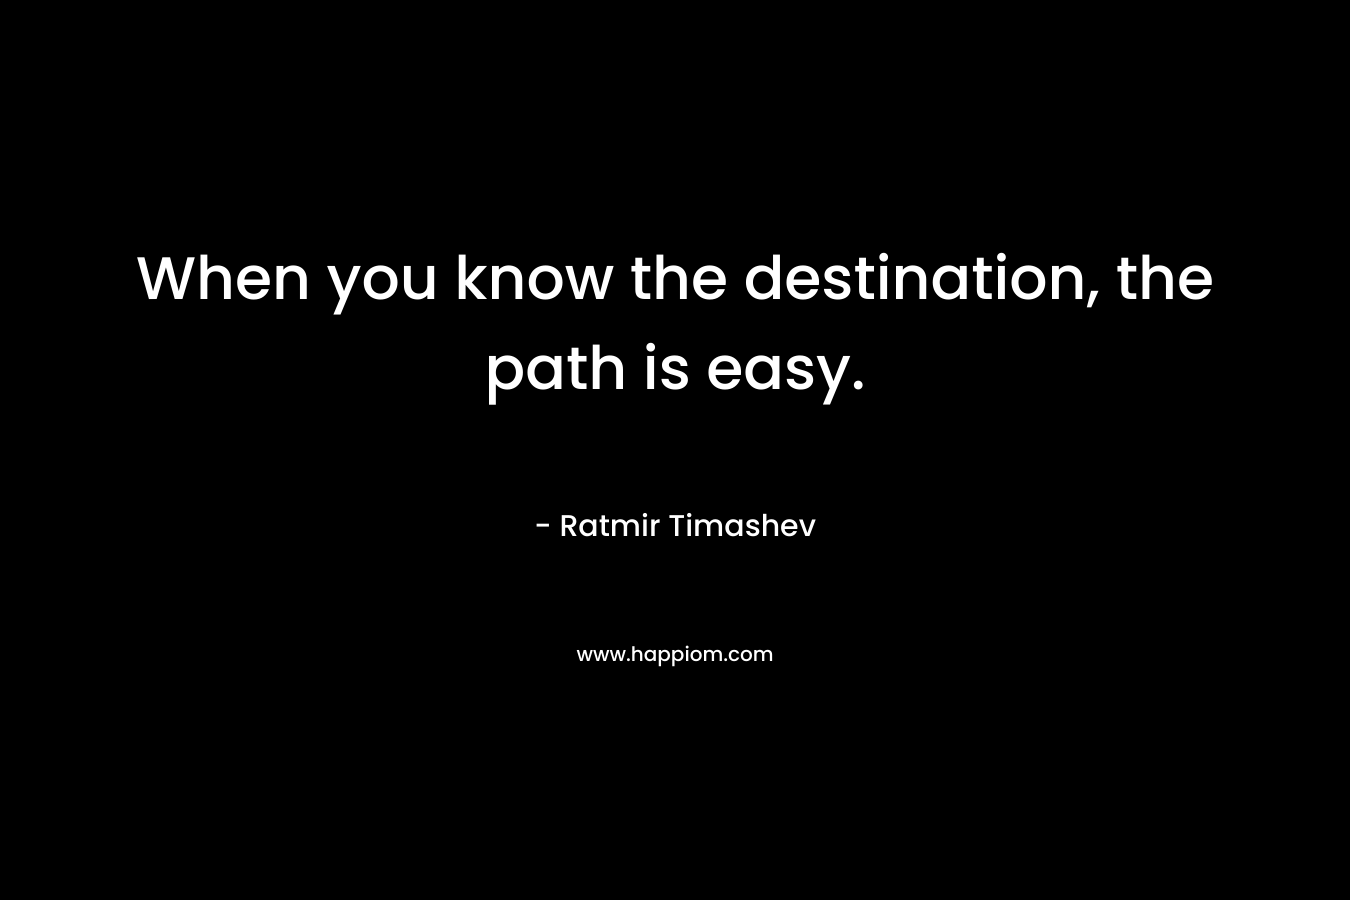 When you know the destination, the path is easy.